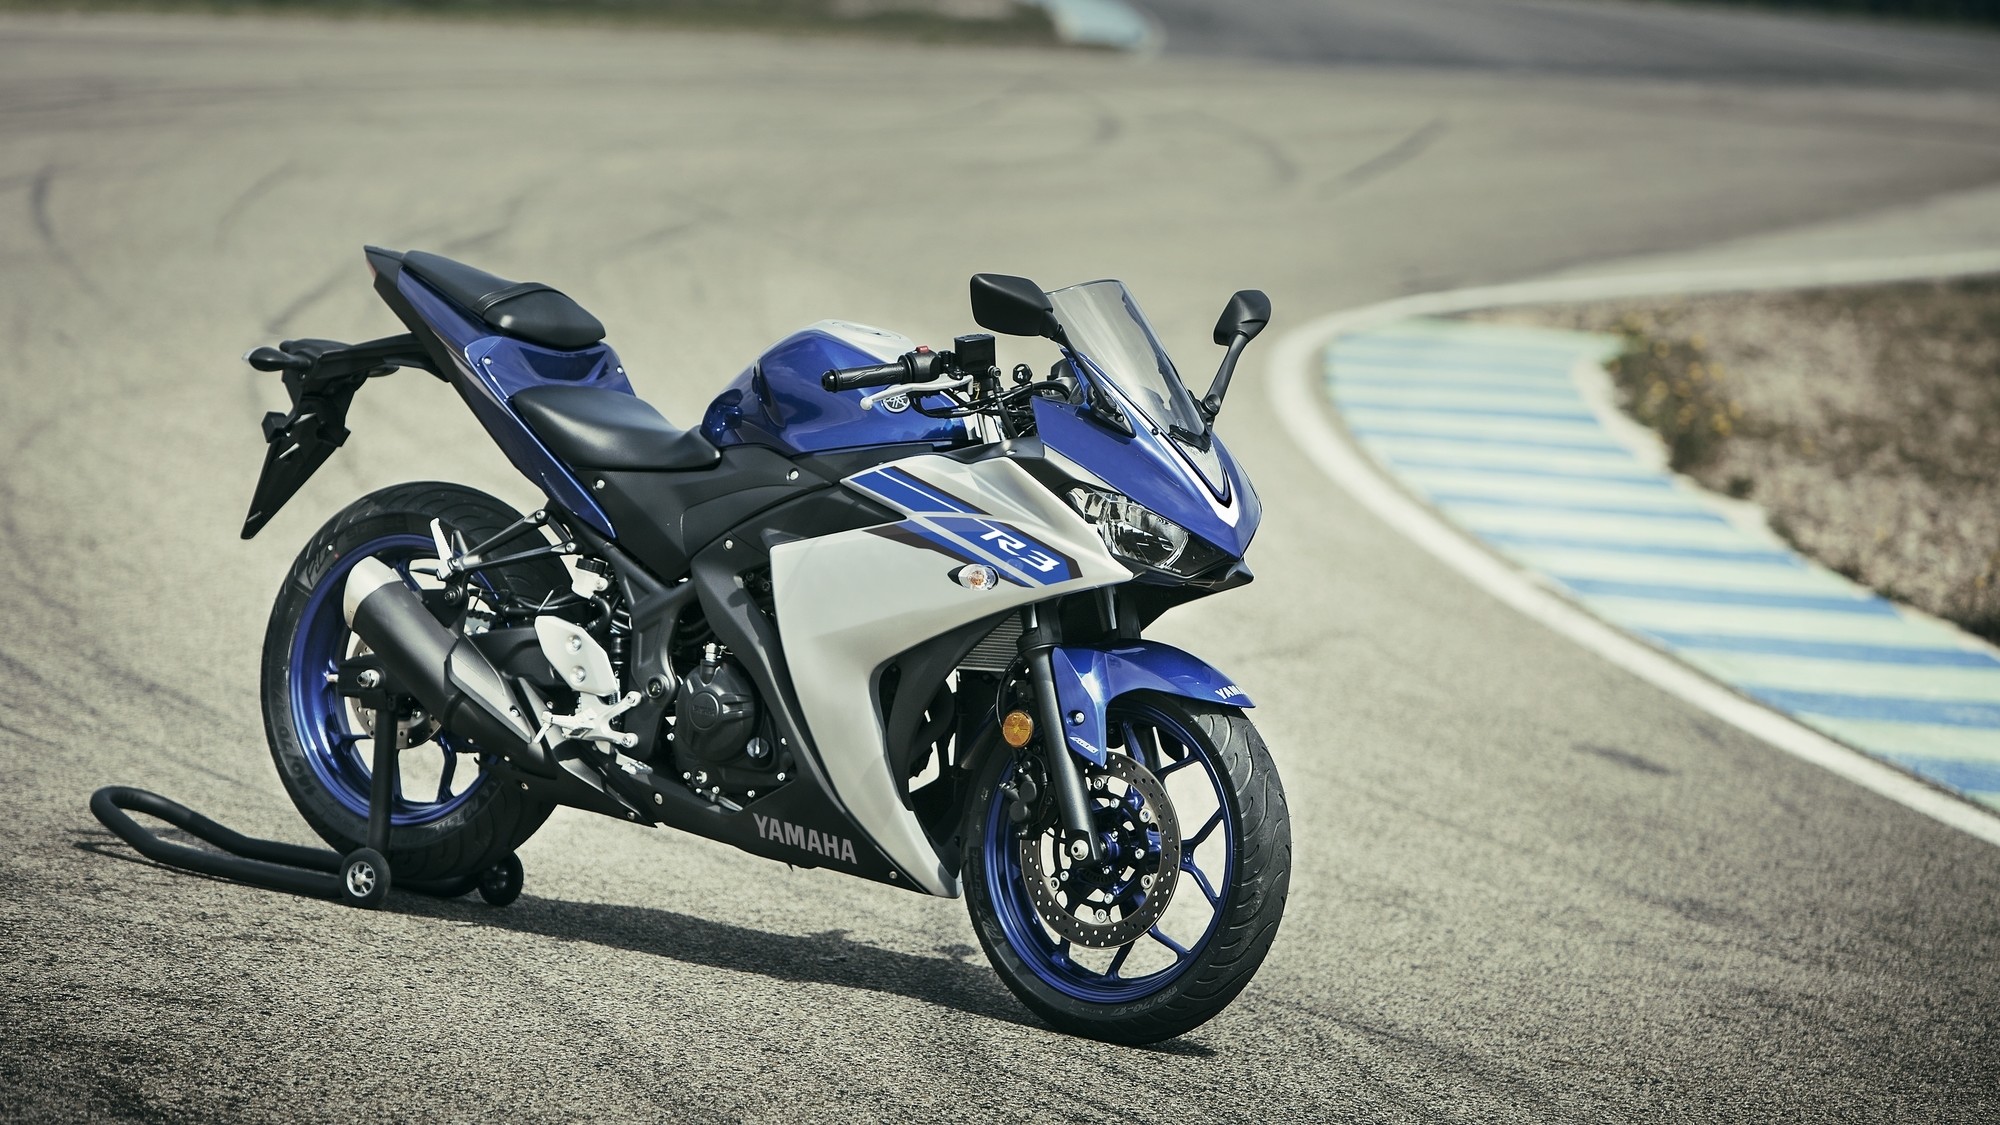 Review: 2015 Yamaha YZF-R3 - Bike Review